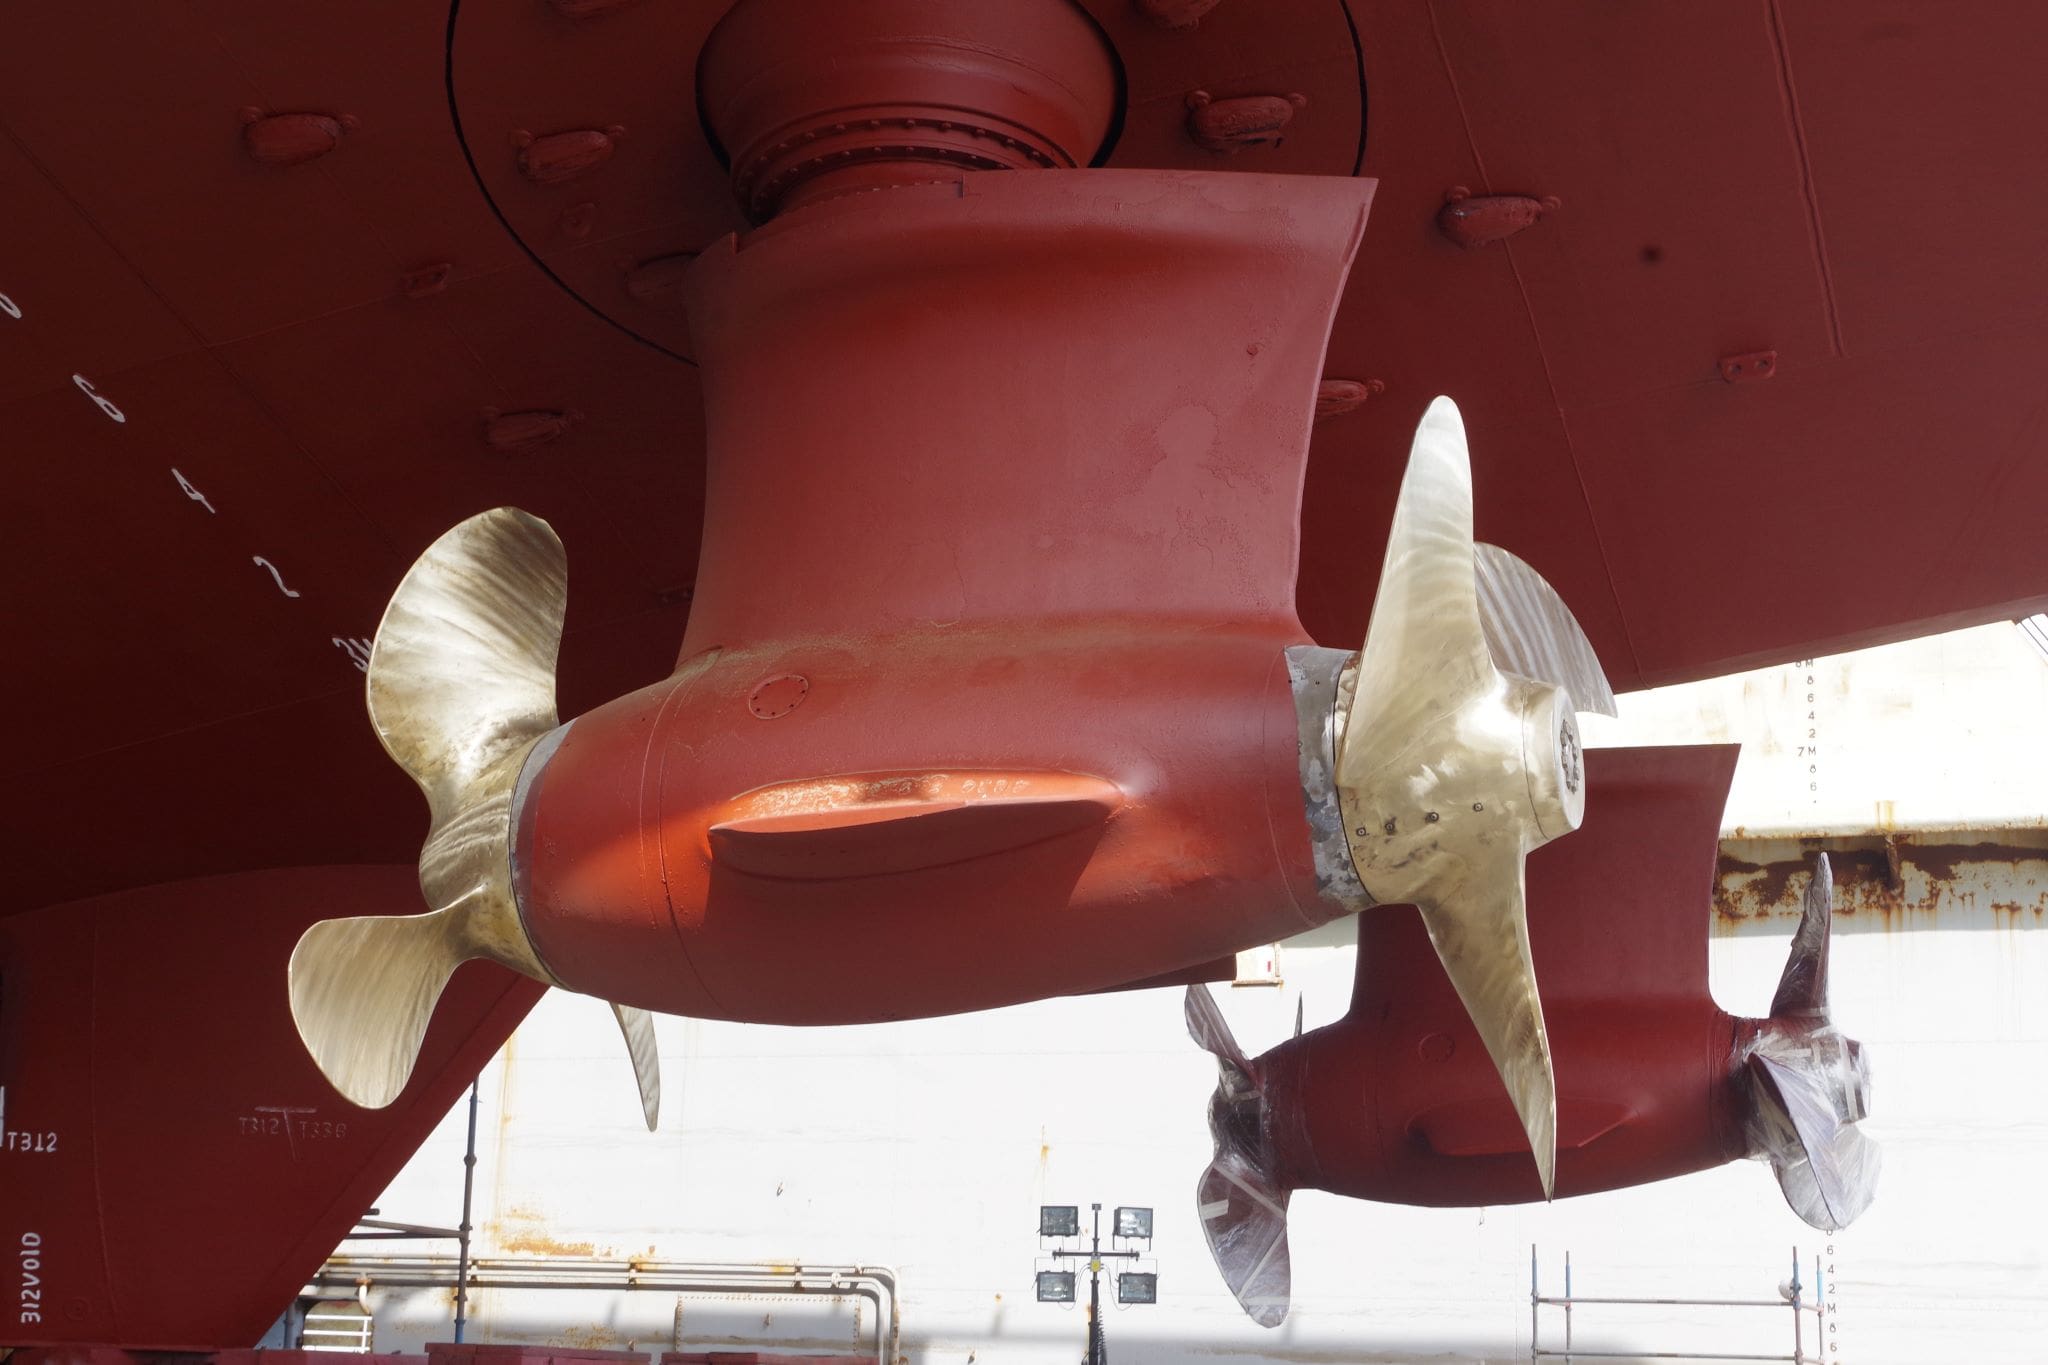 double propellers on a large shipping vessel with possible new hull coatings